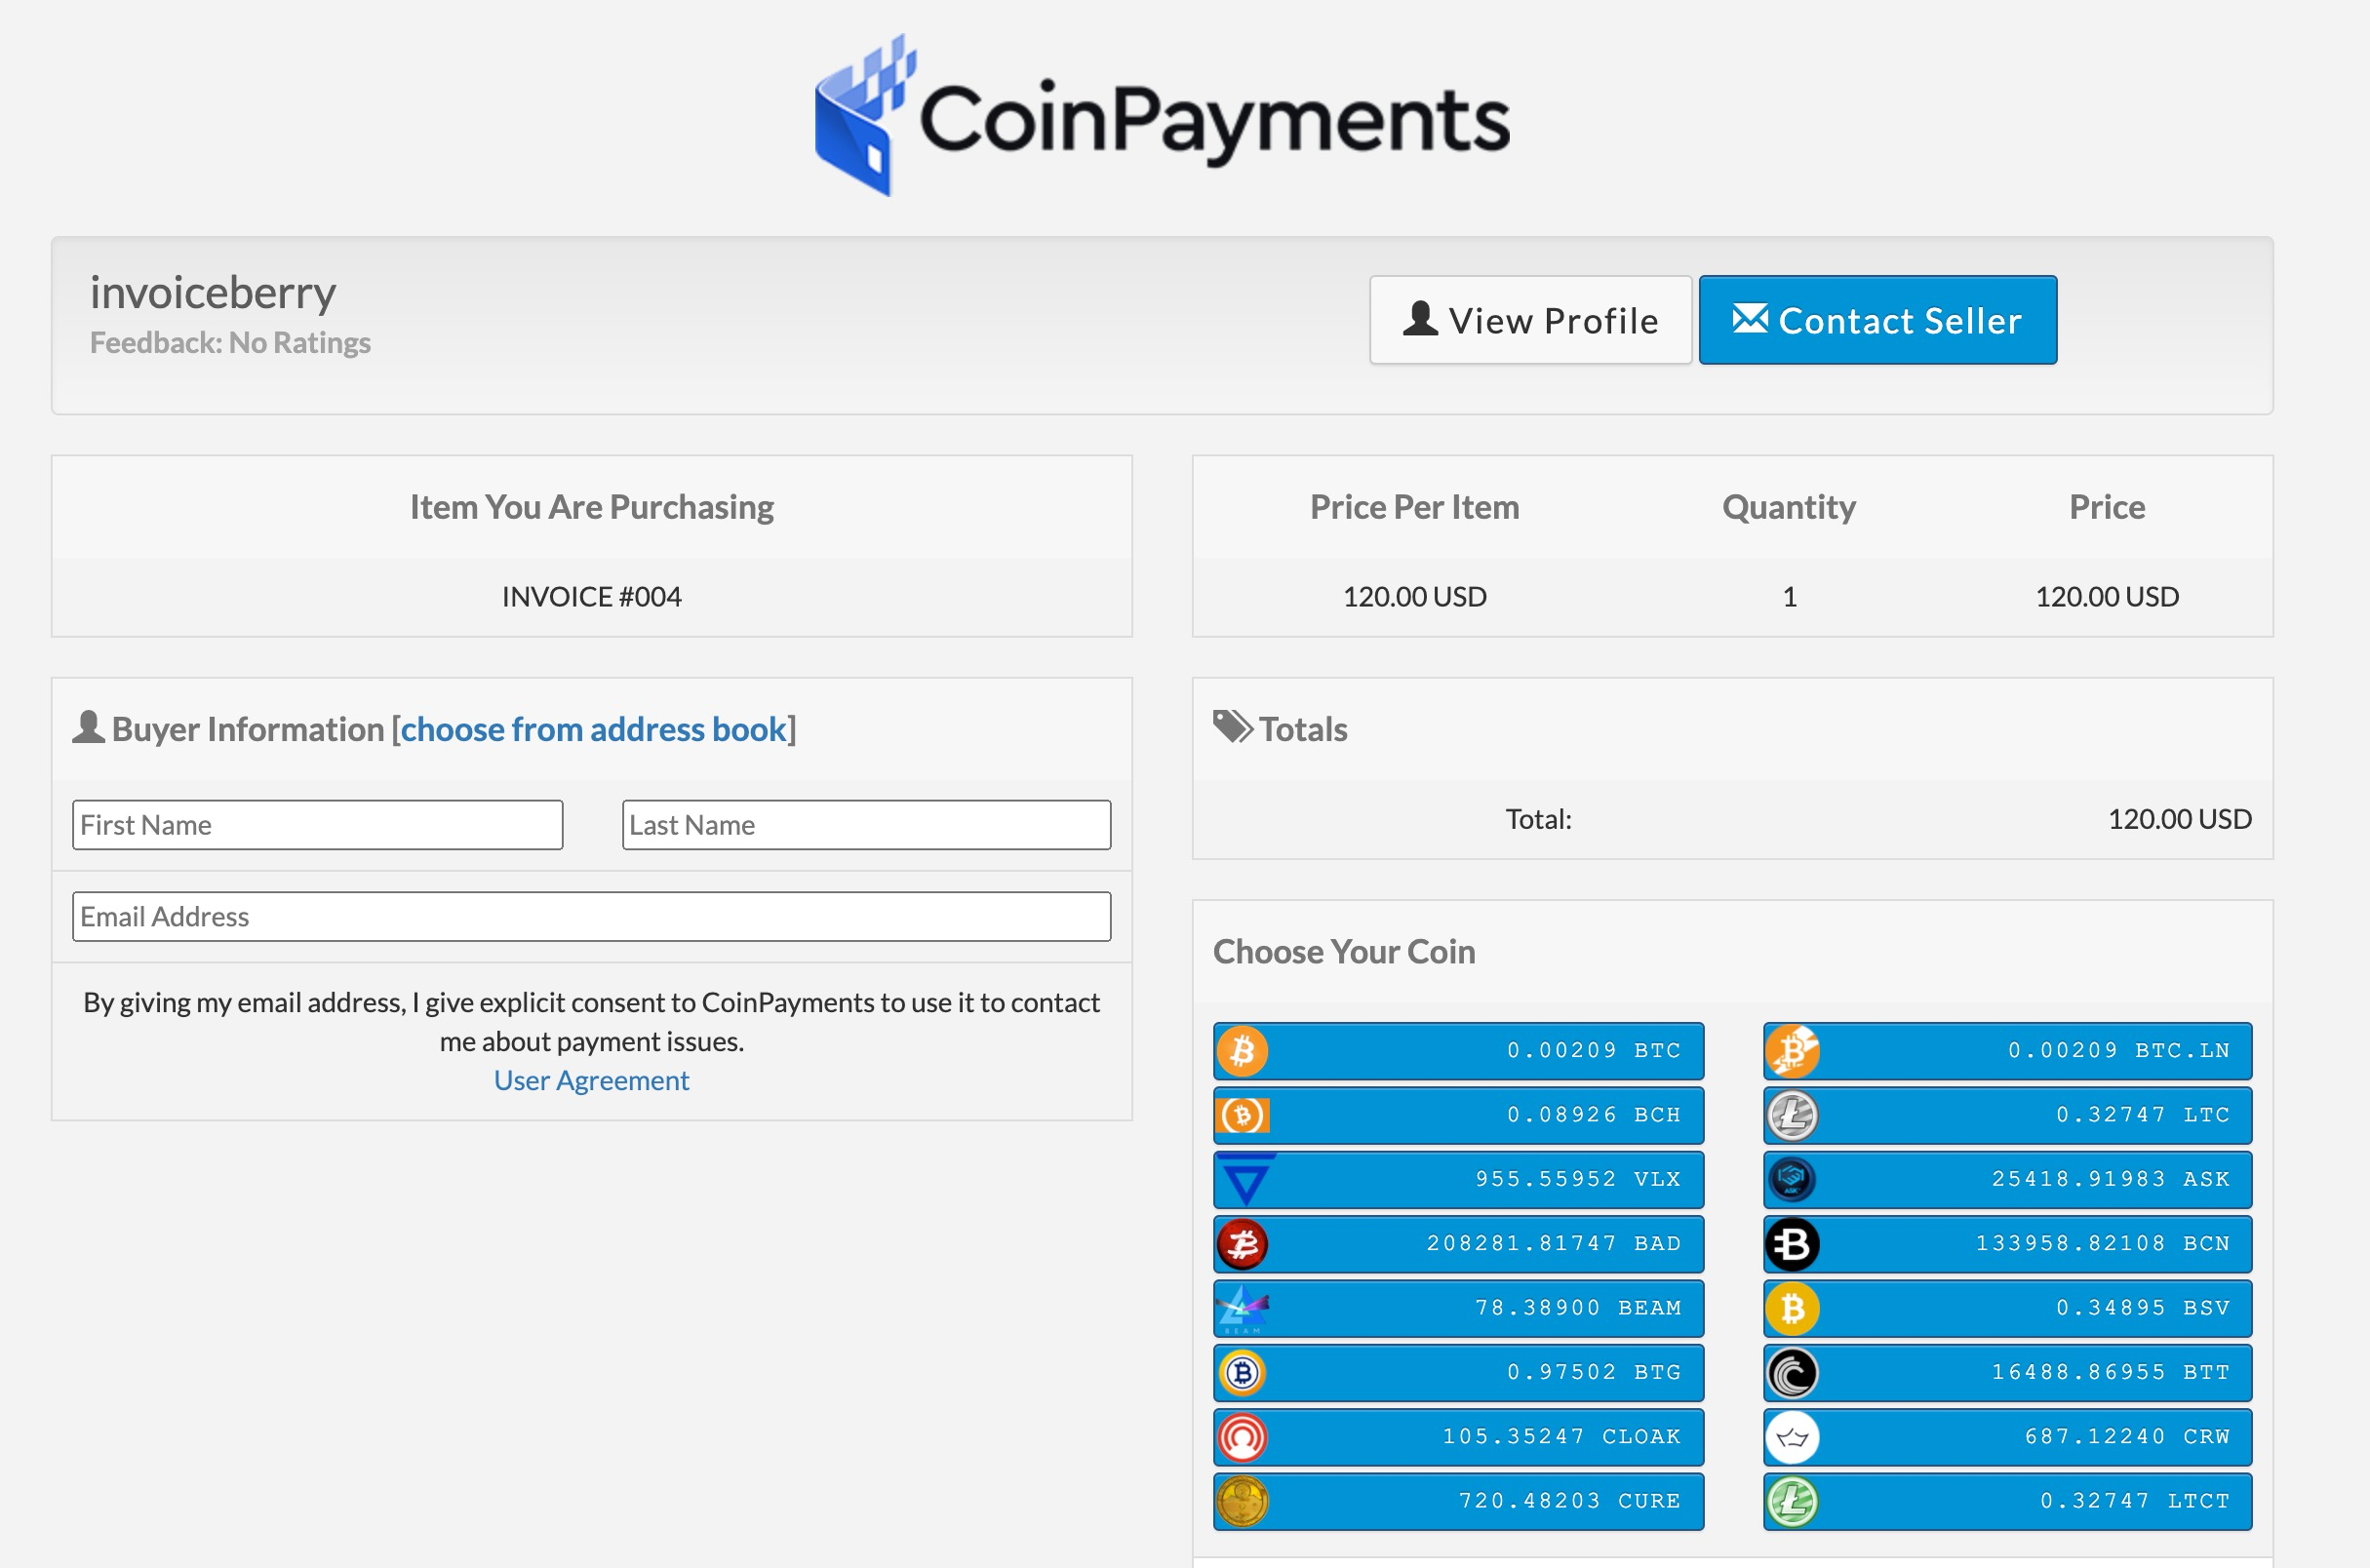 Can i buy bitcoin on coinpayments.net free bitcoins hack excel